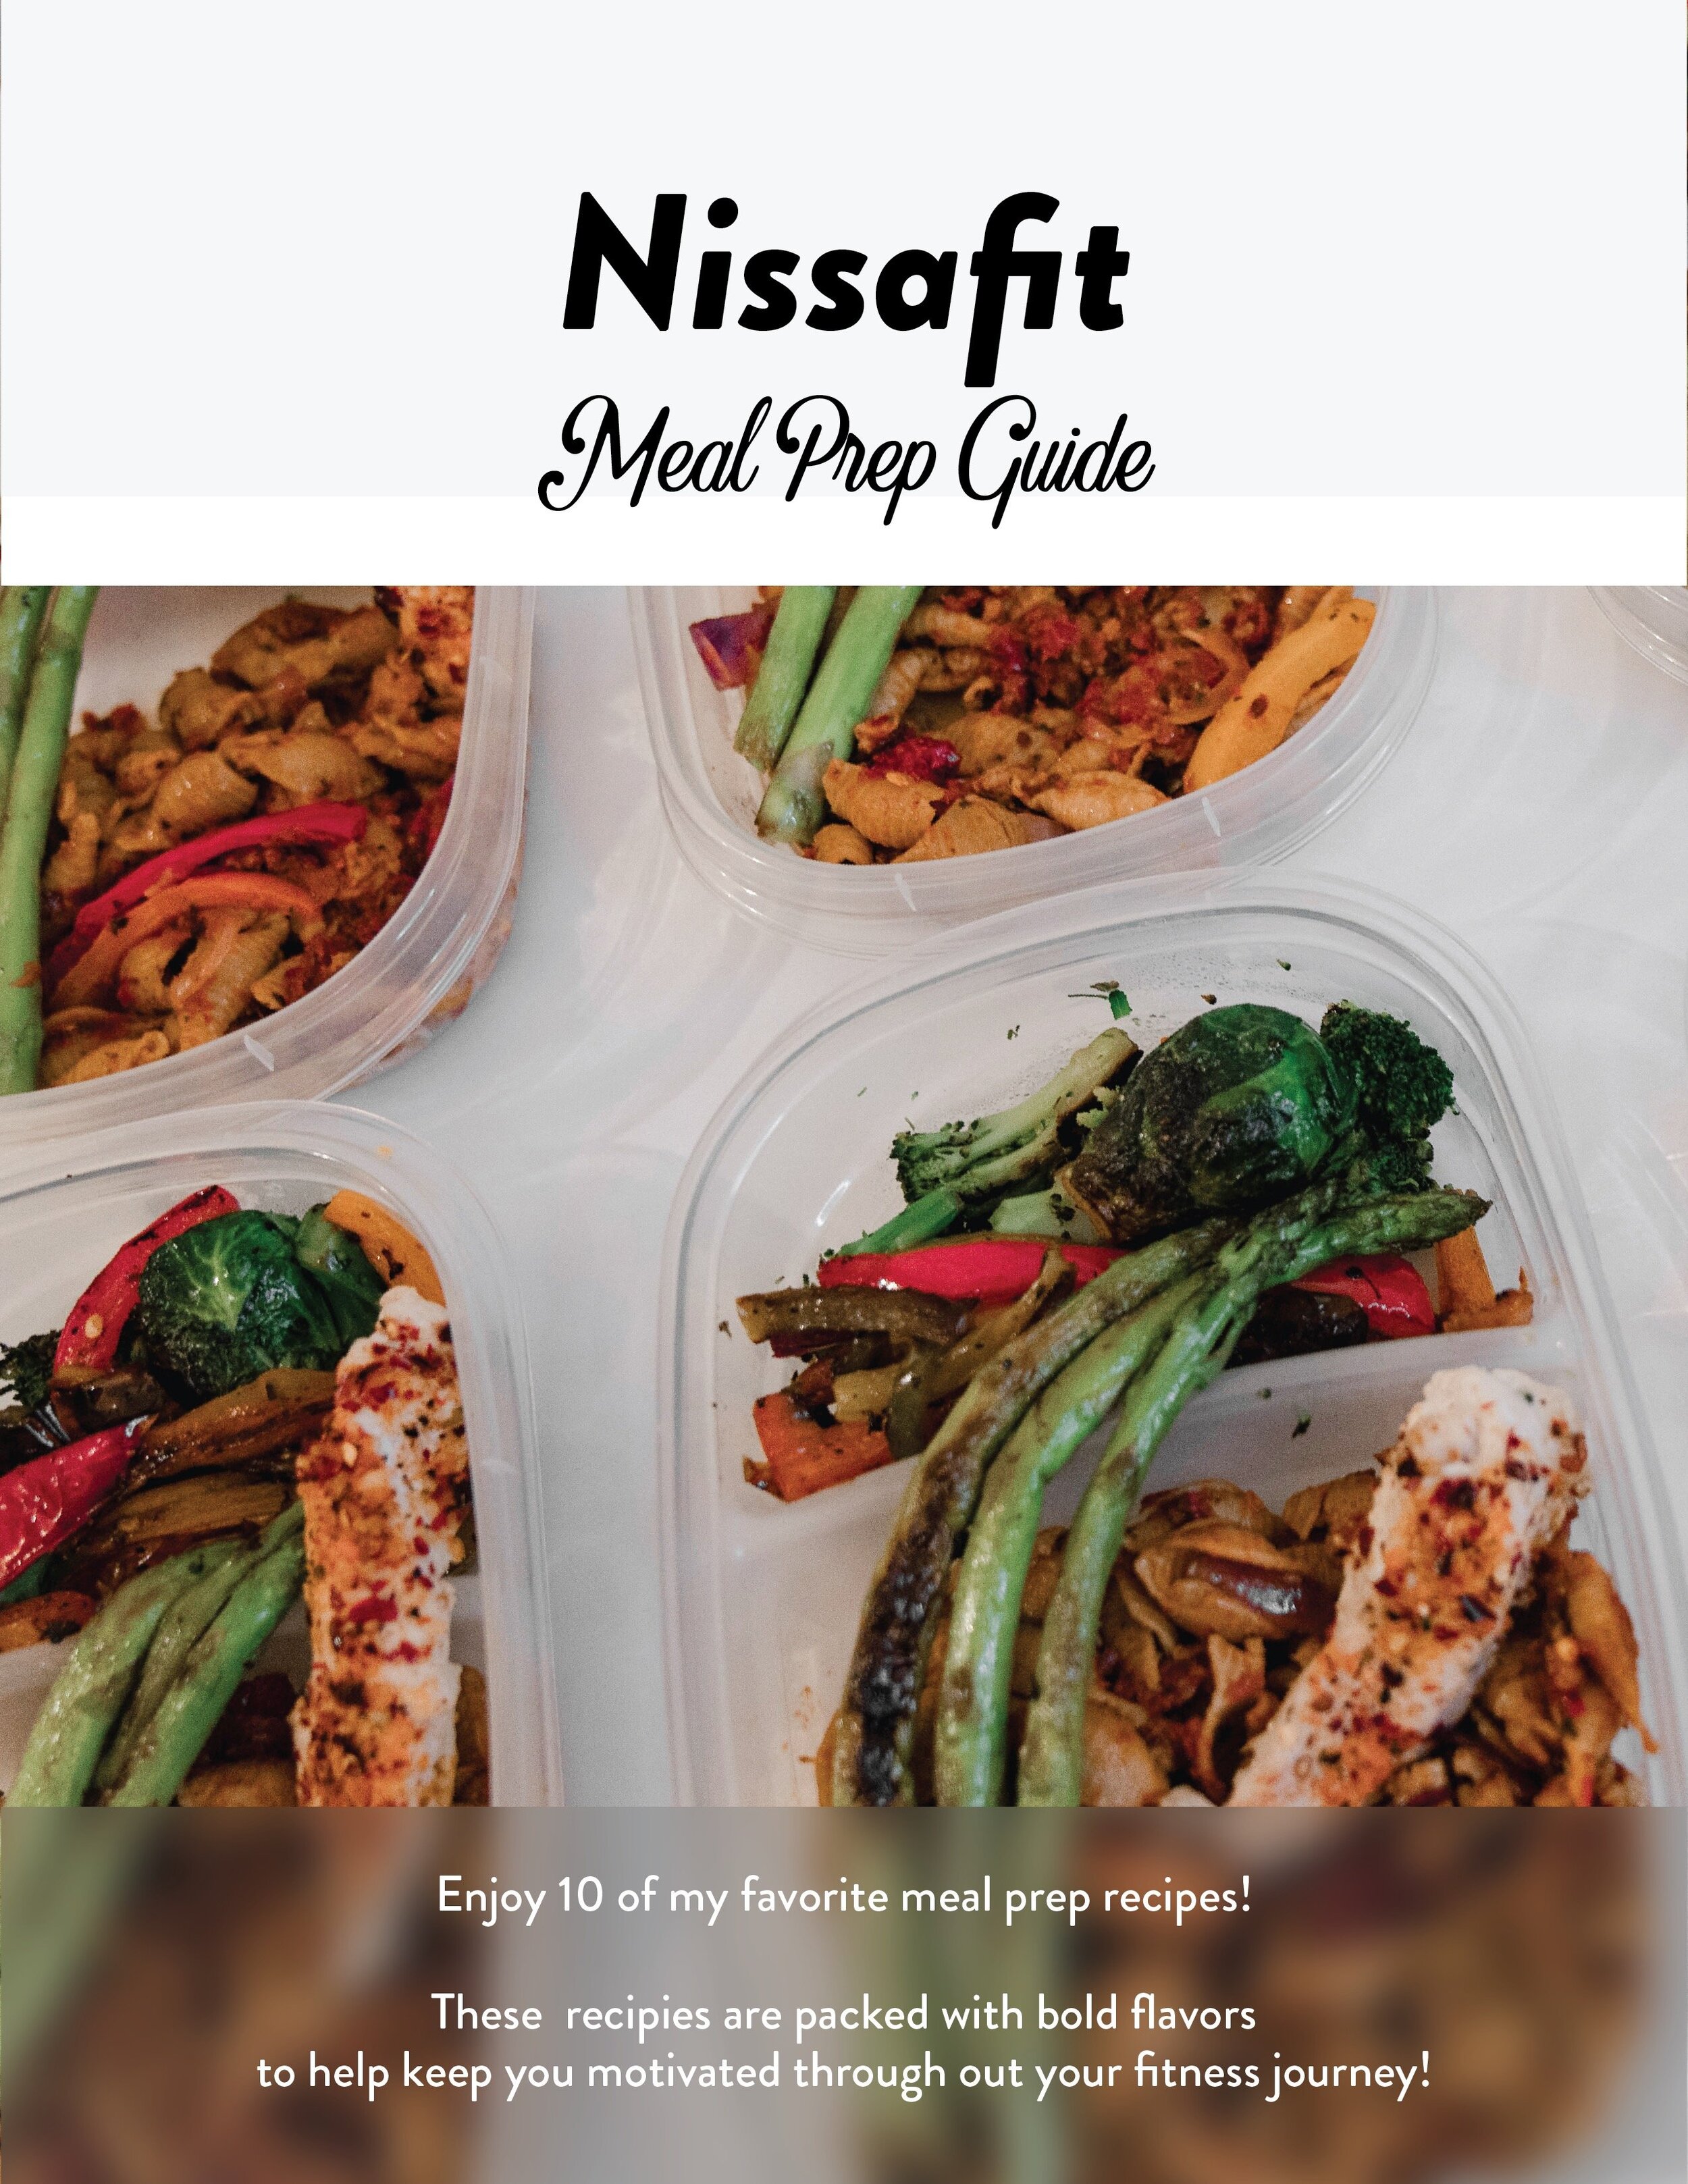 Nissafit Personal Meal Prep Recipes for 10 weeks worth of